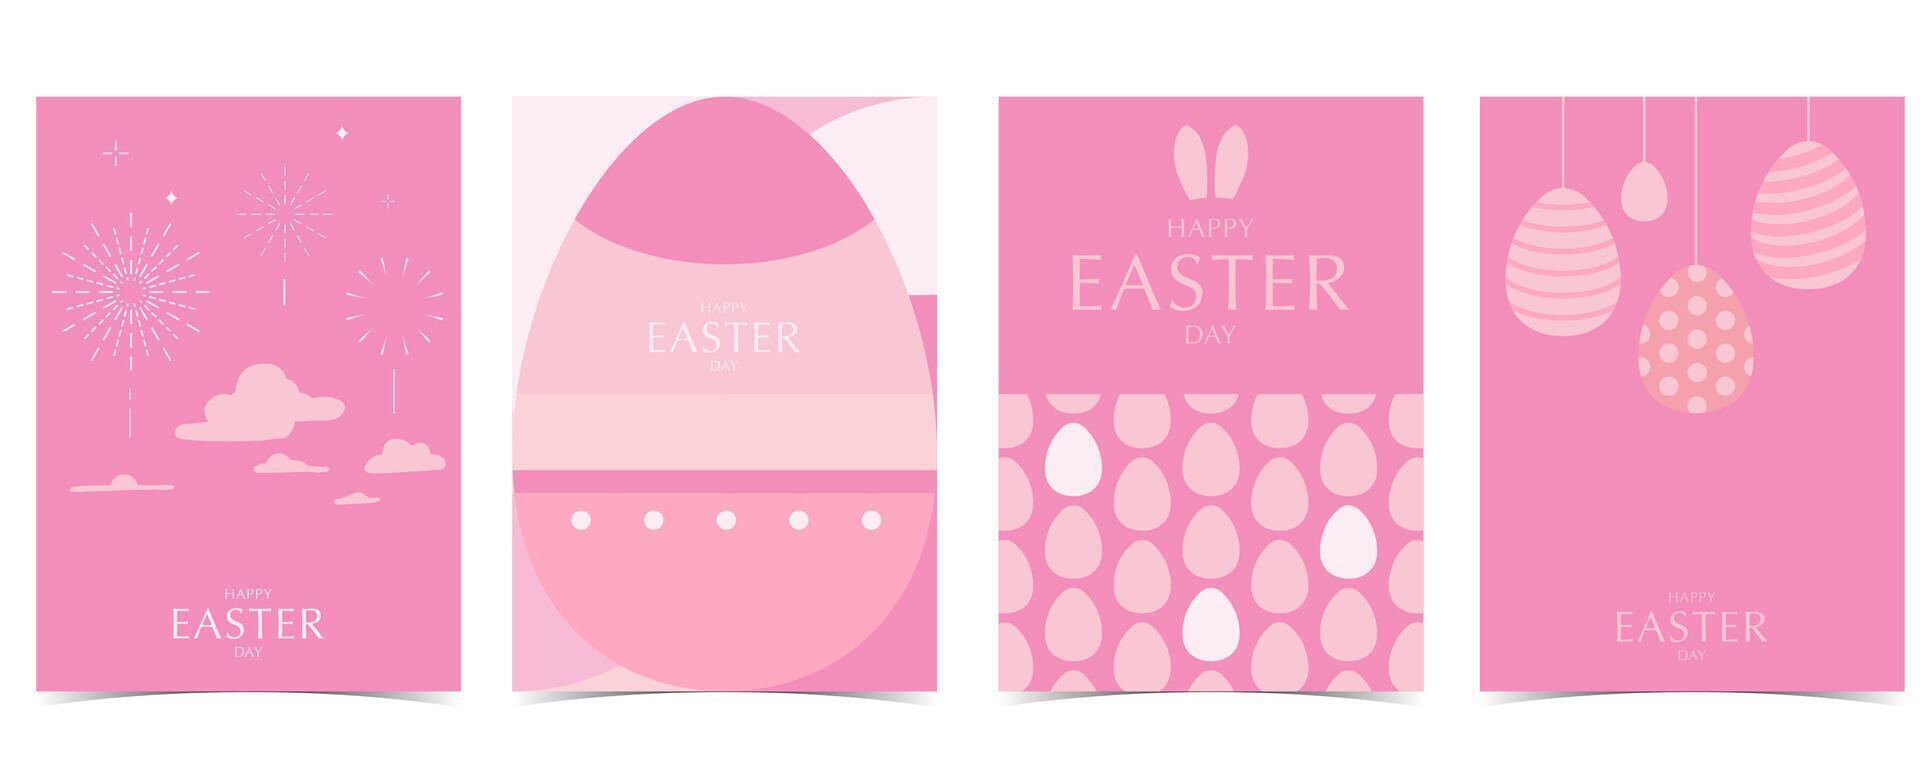 Collection of easter background set with rabbit and egg in silhouette style Editable vector illustration for A4 vertical postcard